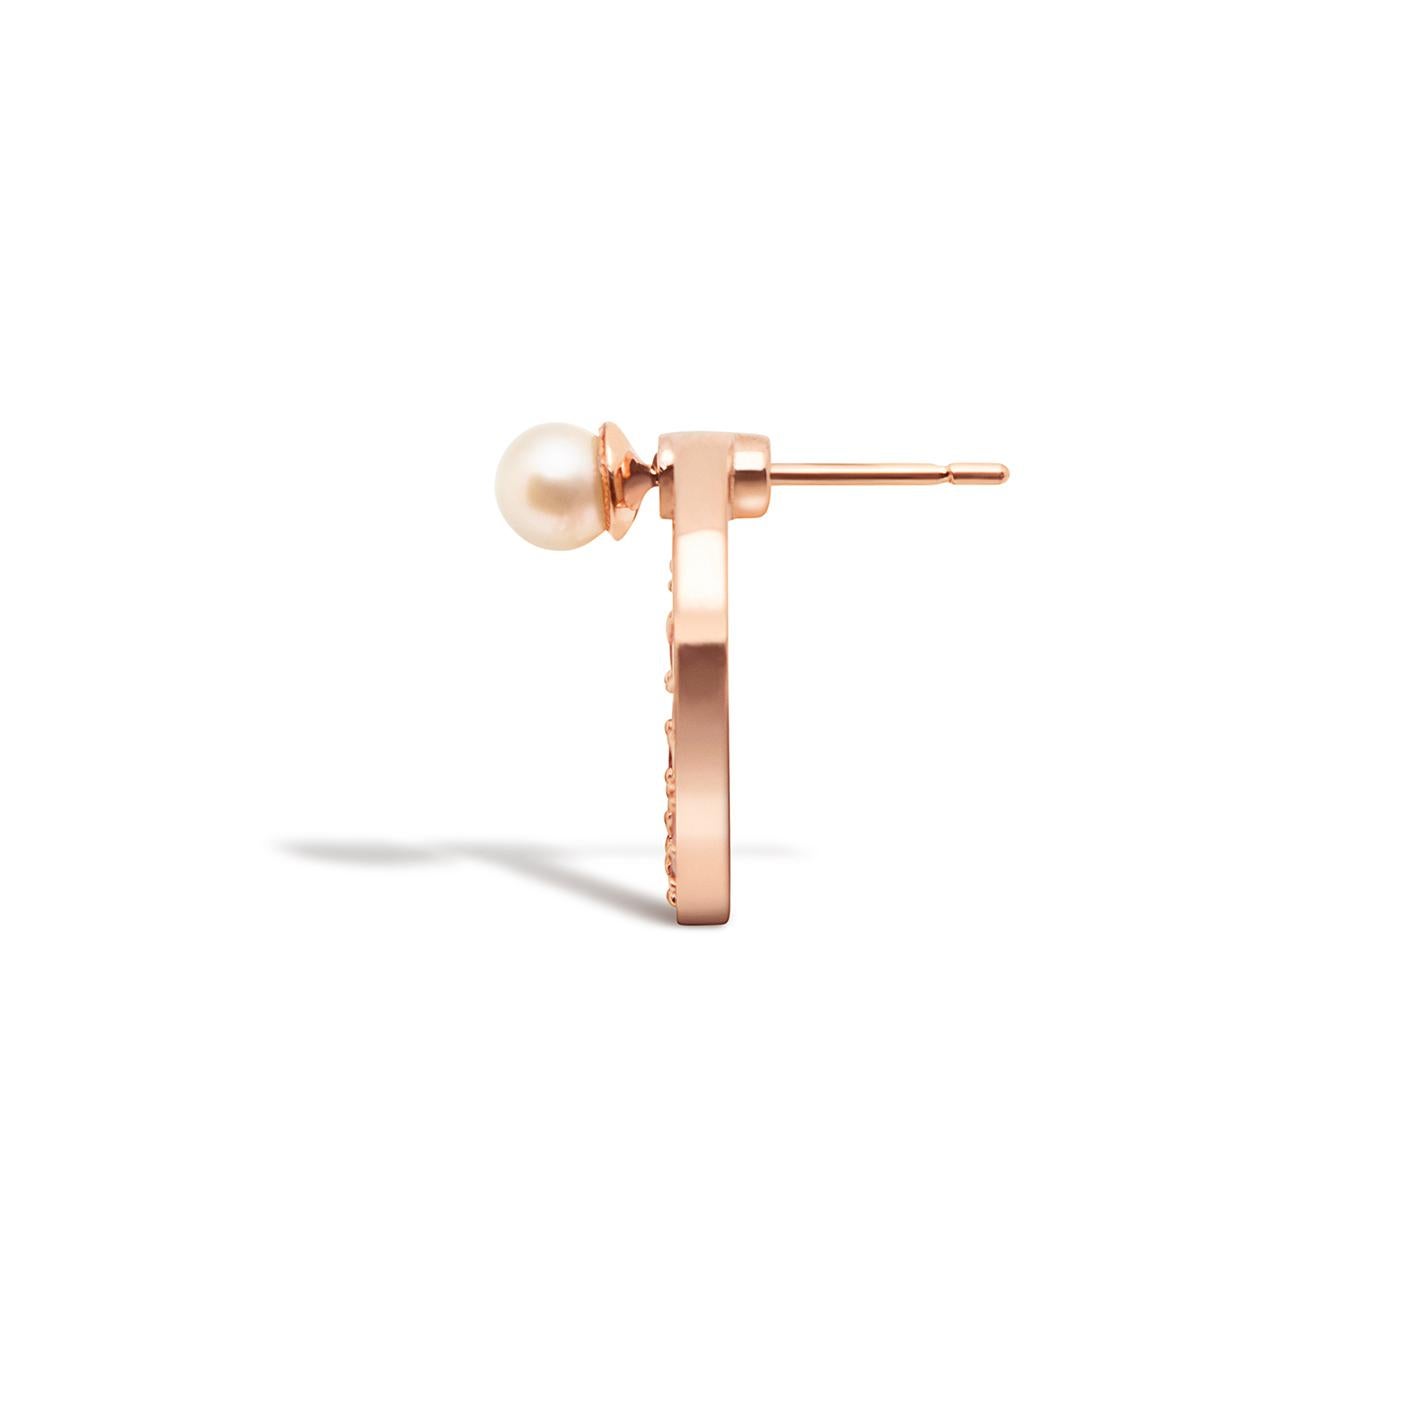 Delicate earrings in rose gold, set with pink sapphires pave and a lustrous freshwater pink pearl stud, for an edgy but feminine everyday piece. The design is inspired by the African tribes' traditional earplugs in stretched lobe, all made refined